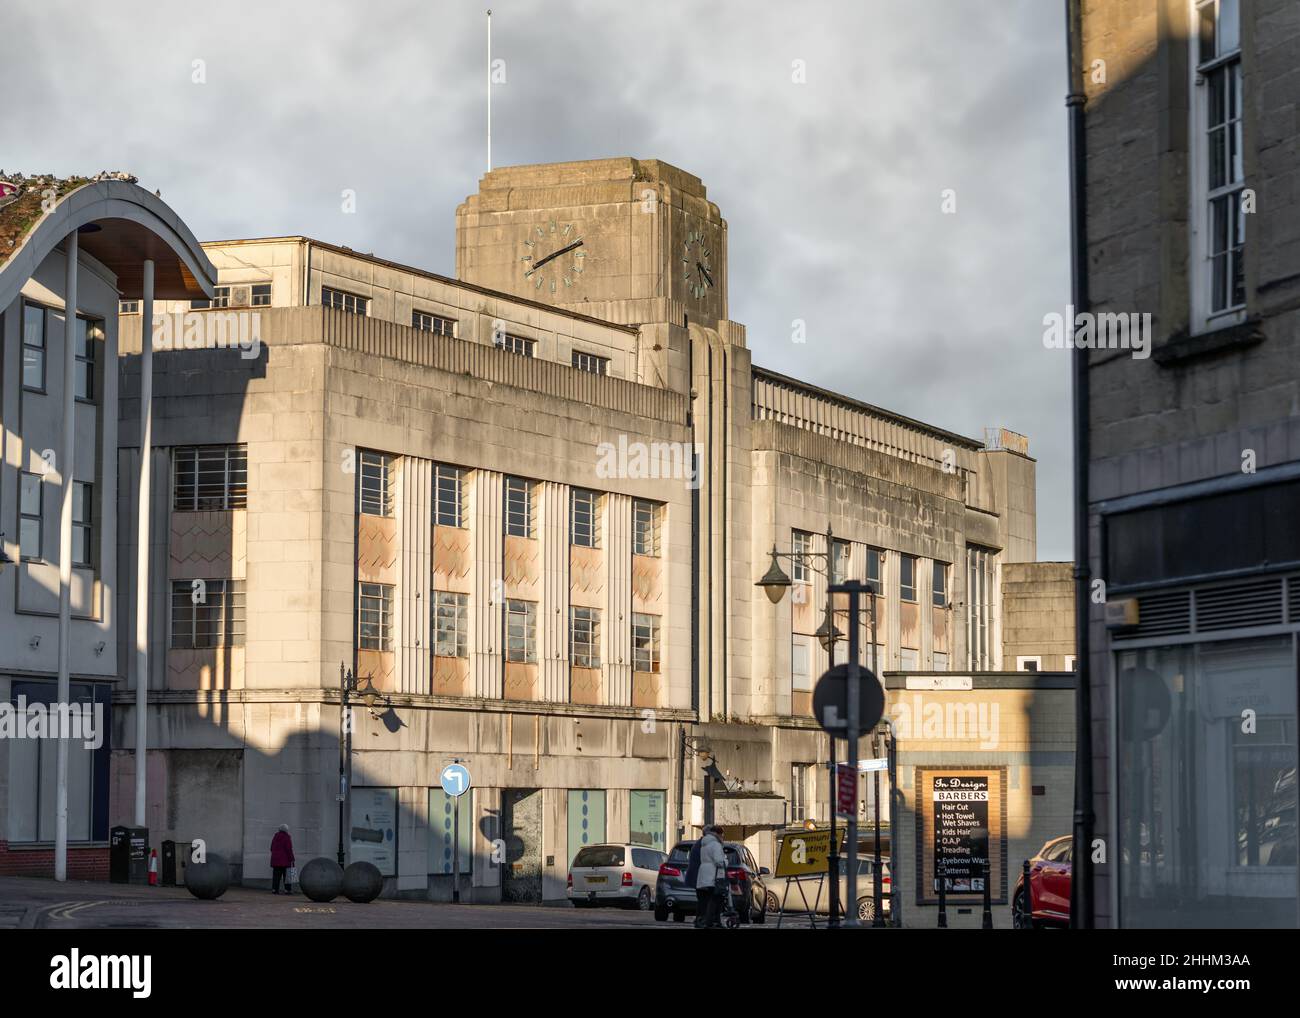 Run down old department store shop closed on city high street in town centre 1950's art deco styling clock tower, boarded up shut down no customers Stock Photo